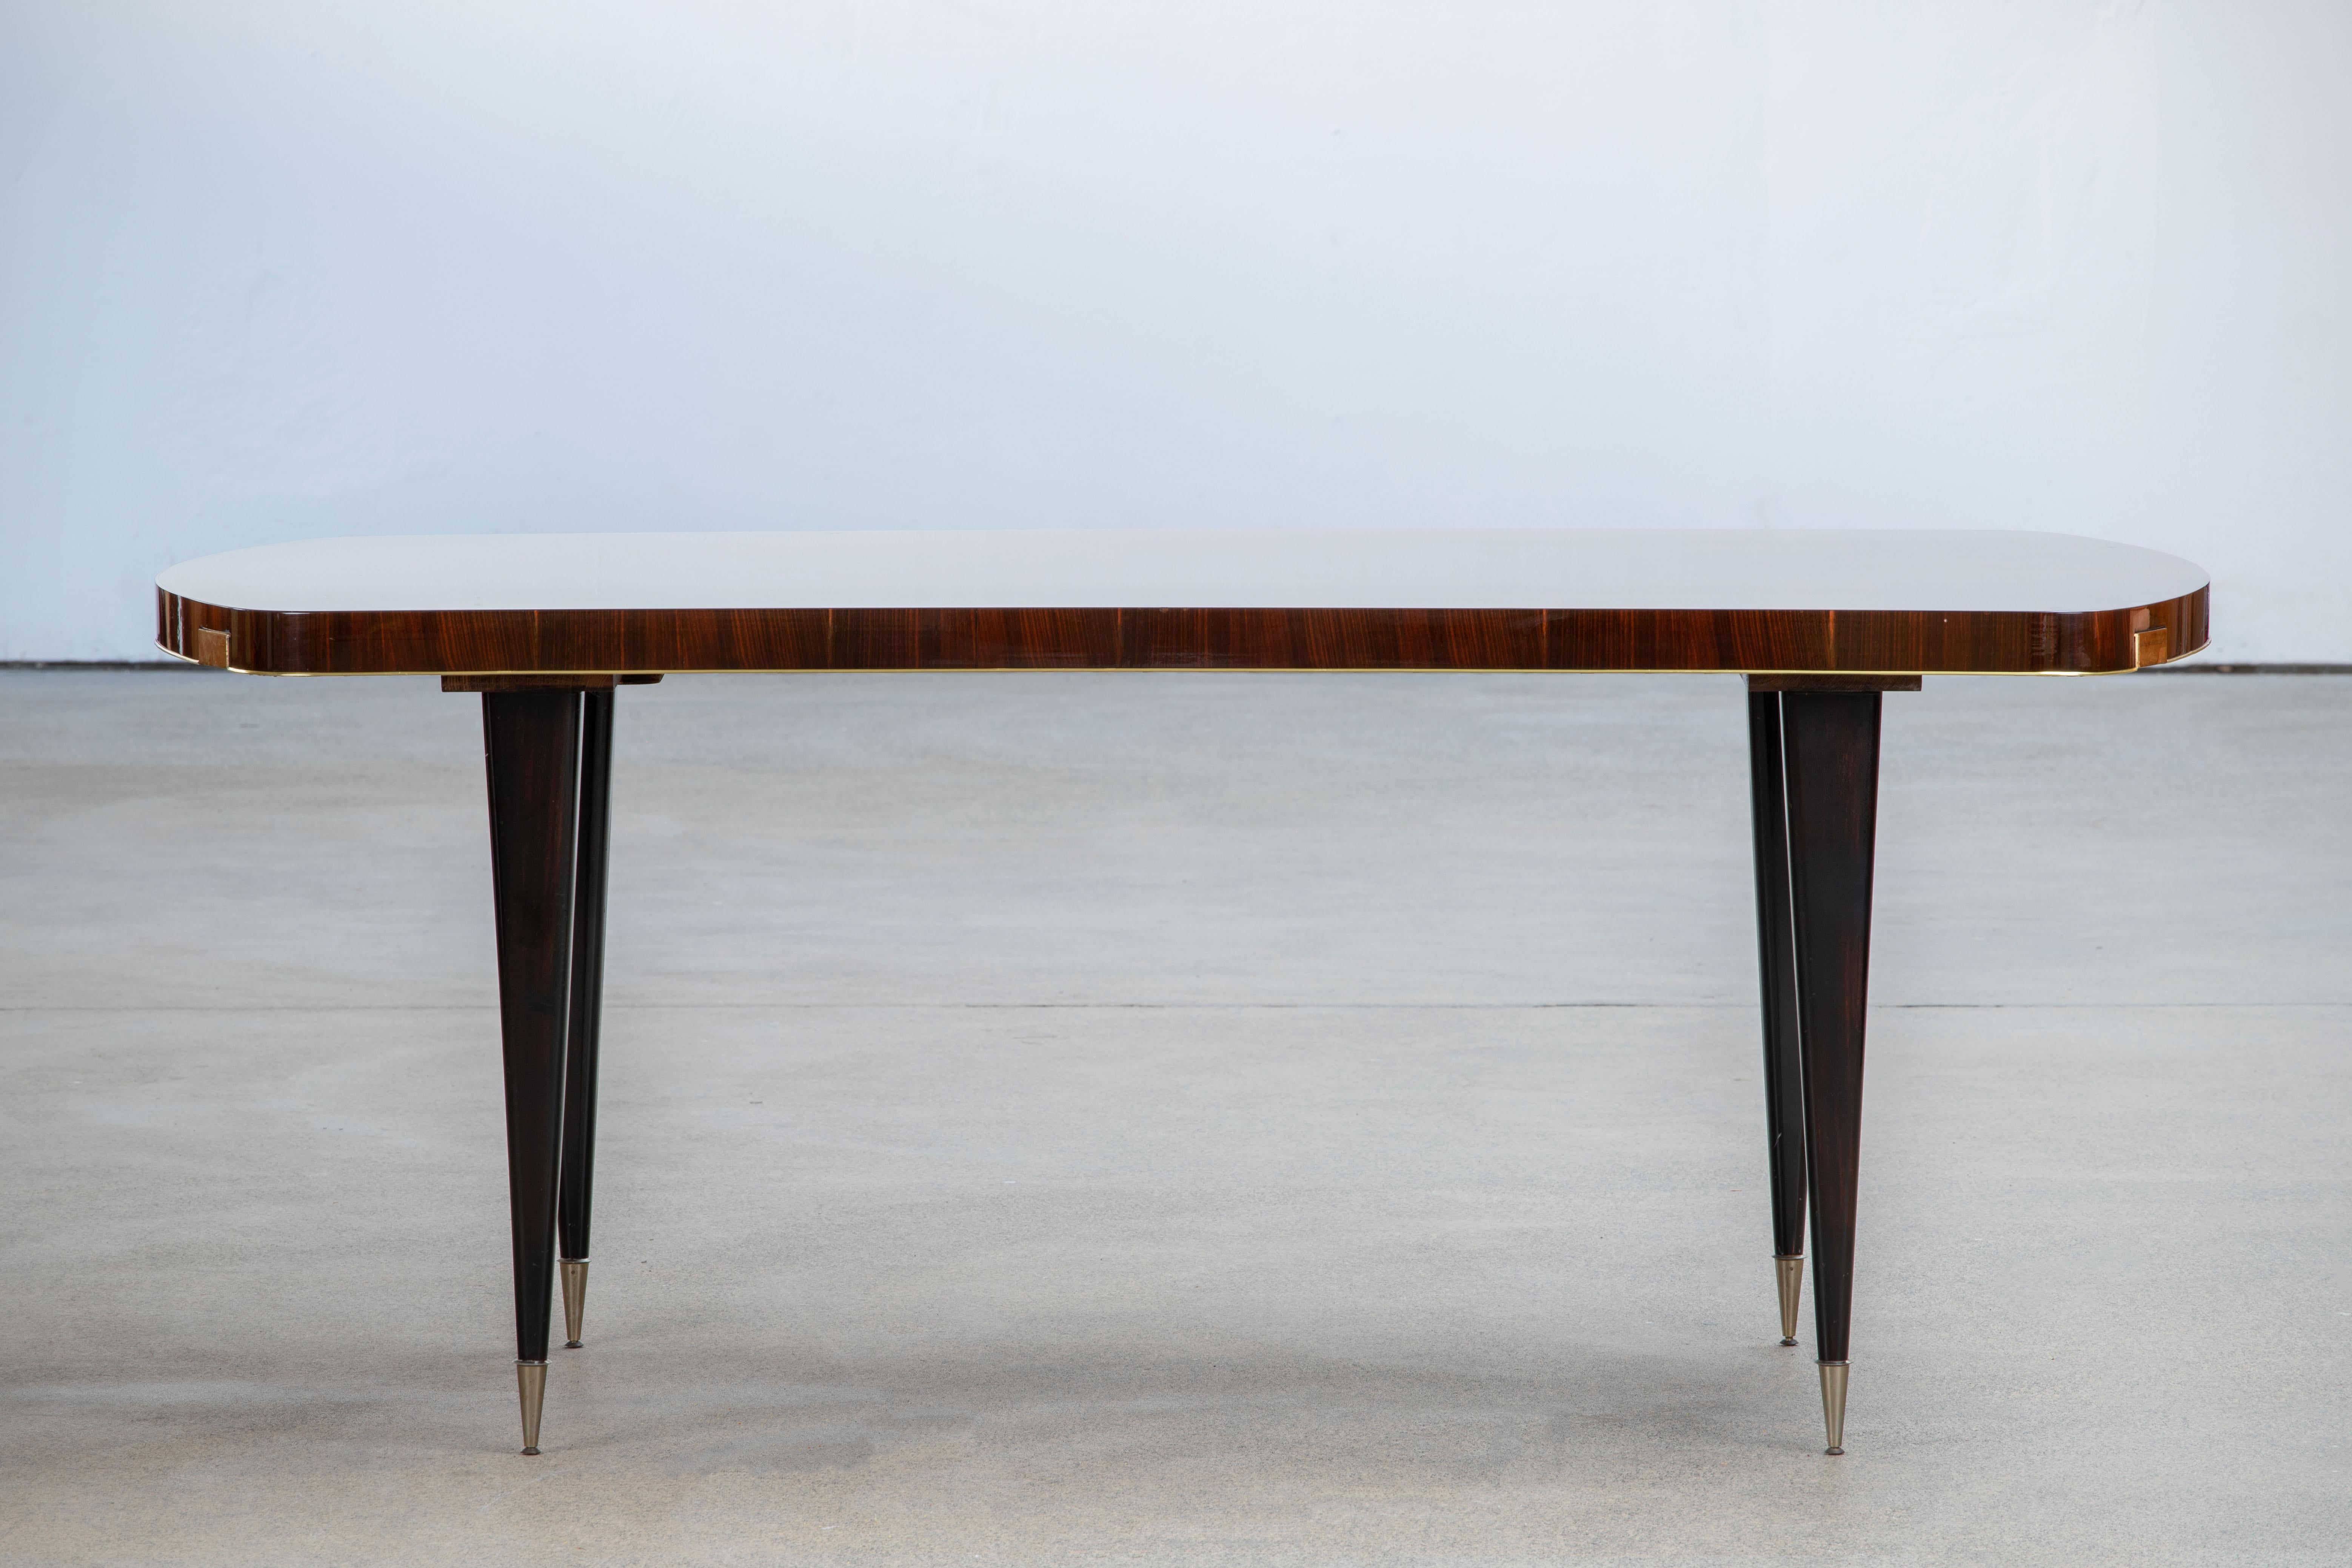 French Art Deco Brutalist Table, Macassar, 1940s For Sale 2